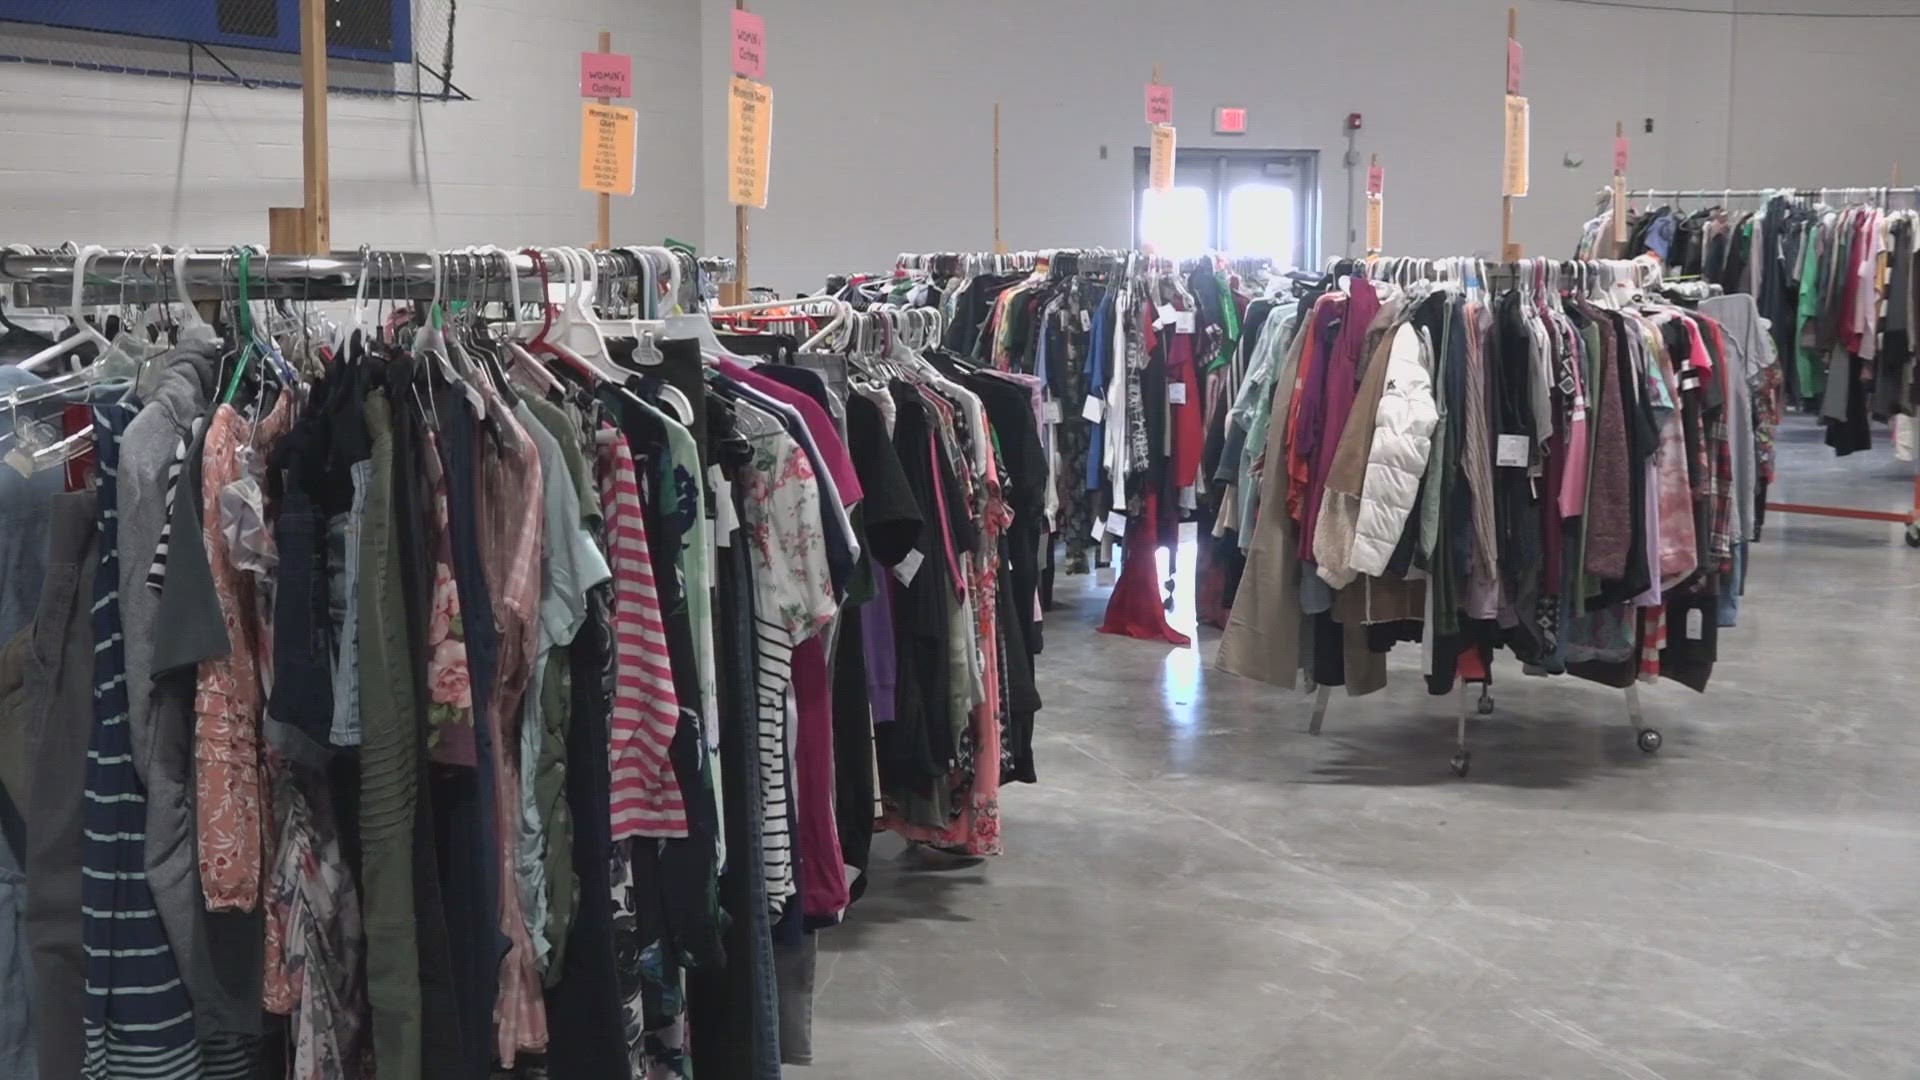 Another big resale event is happening in South County to help families buy items for as little as 50 cents.